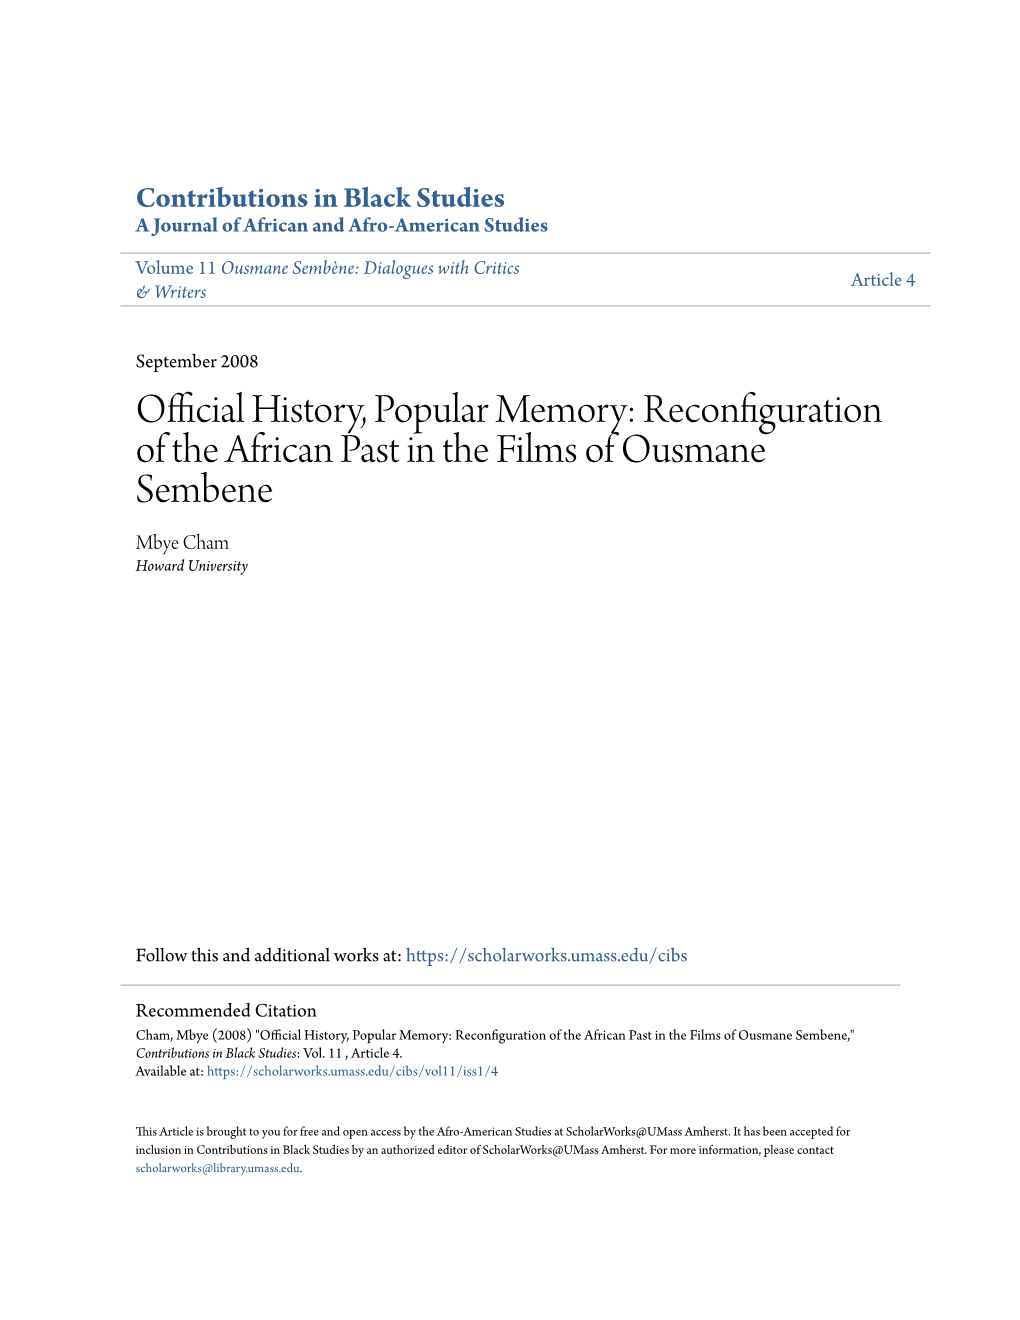 Official History, Popular Memory: Reconfiguration of the African Past in the Films of Ousmane Sembene Mbye Cham Howard University